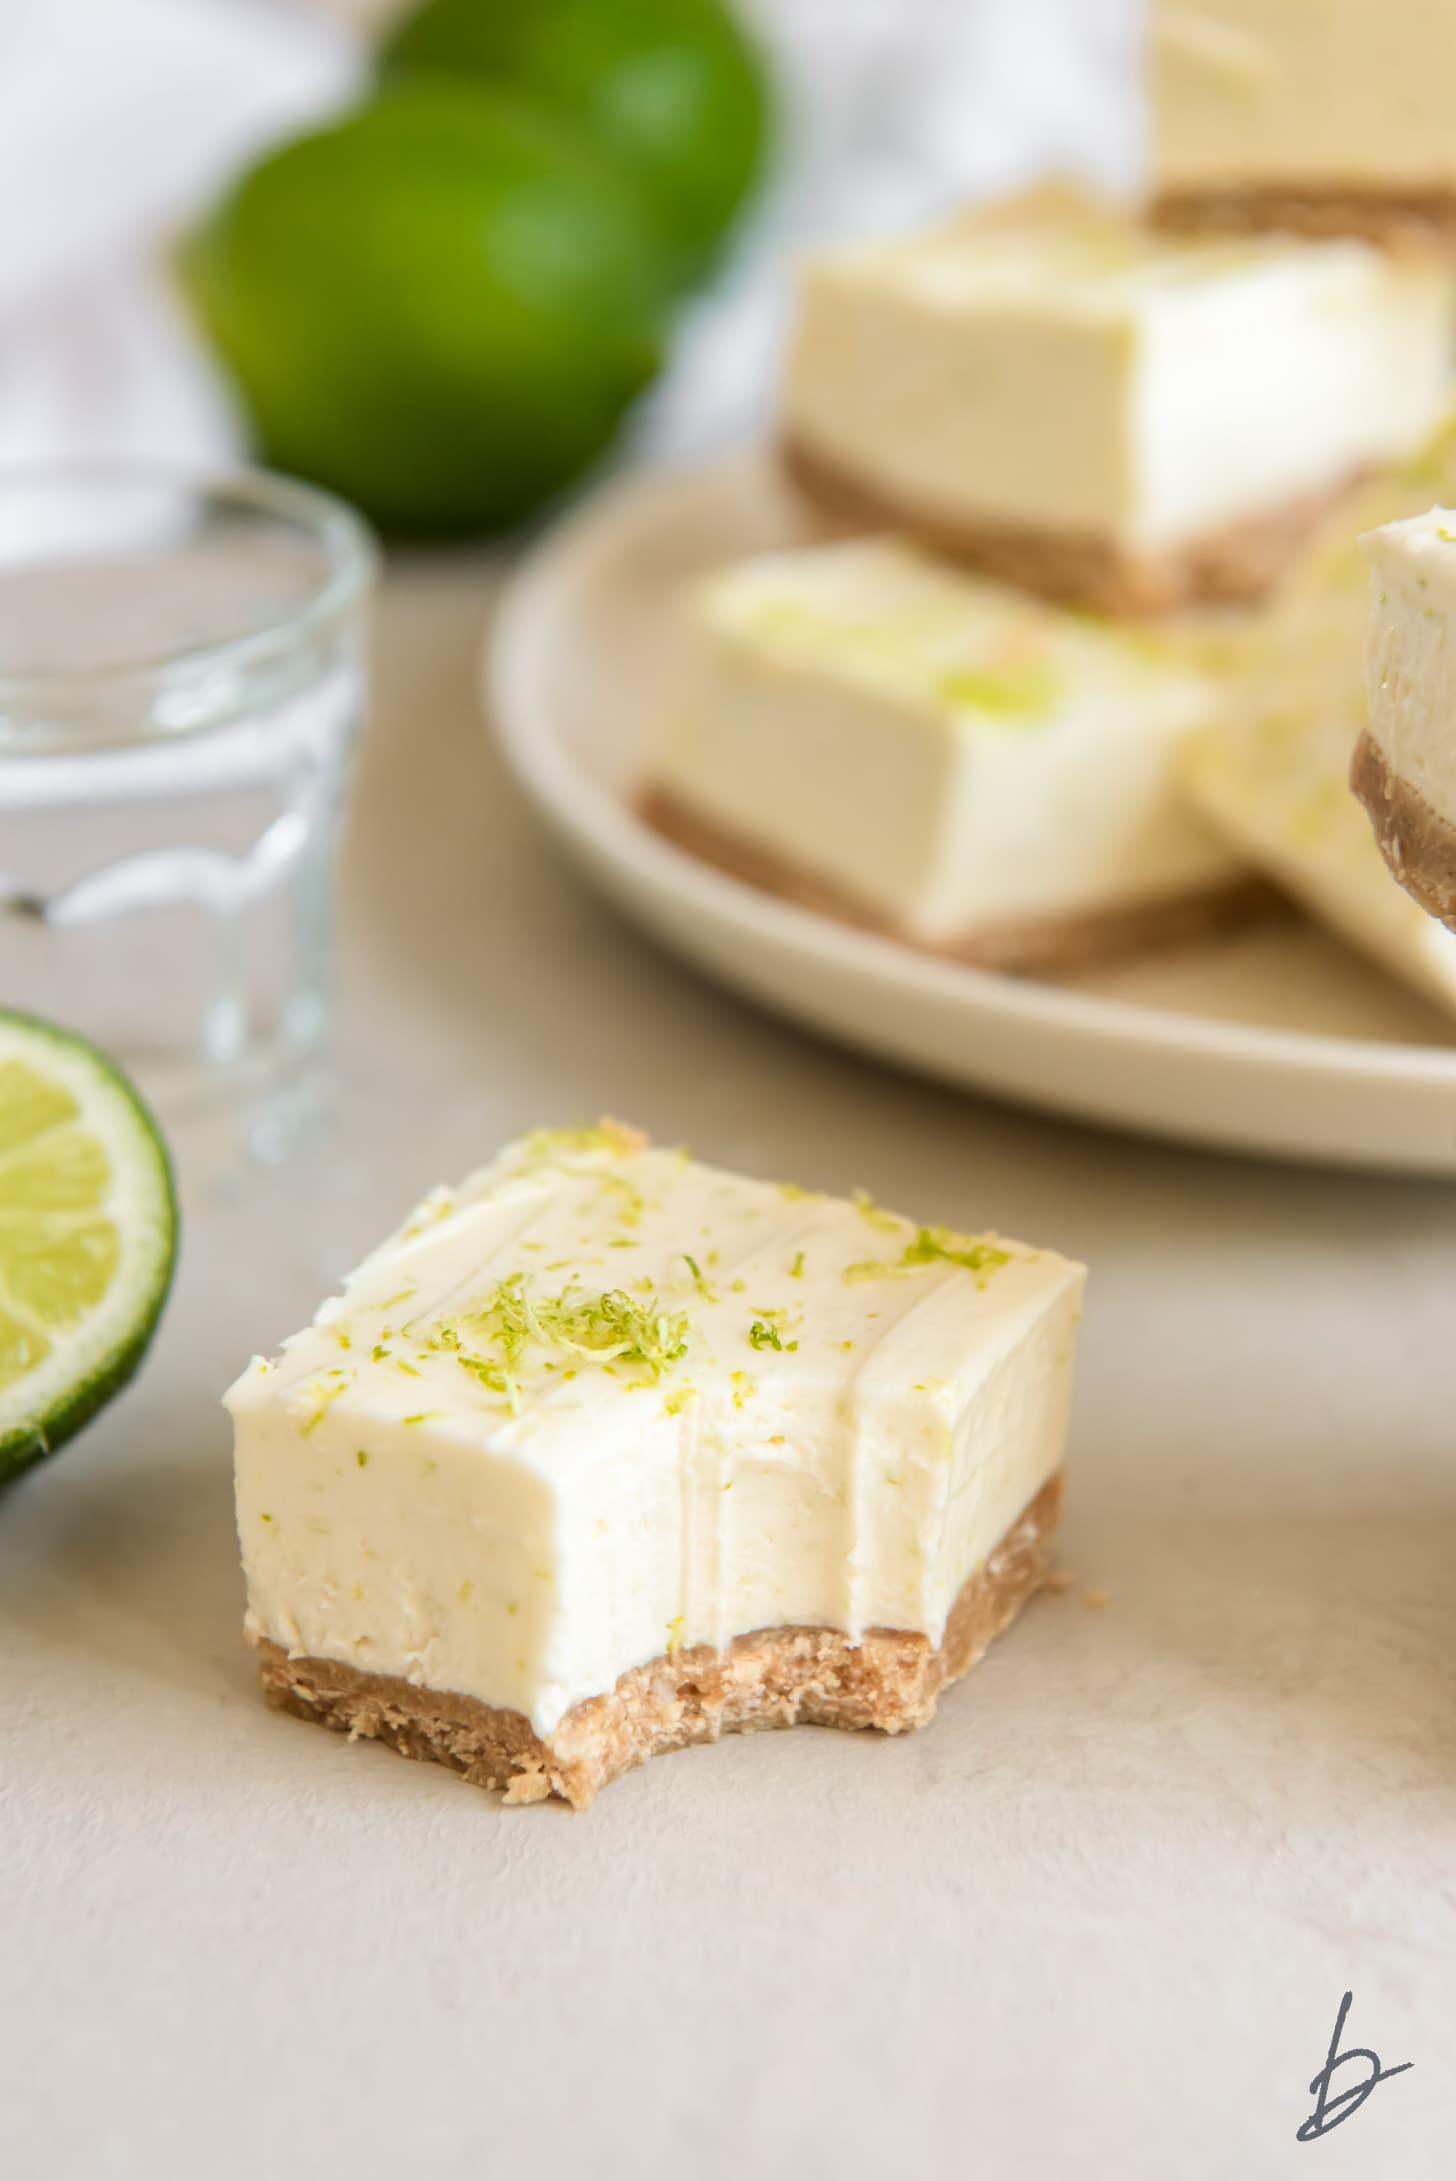 No bake margarita cheesecake bar with a bite and lime zest on top